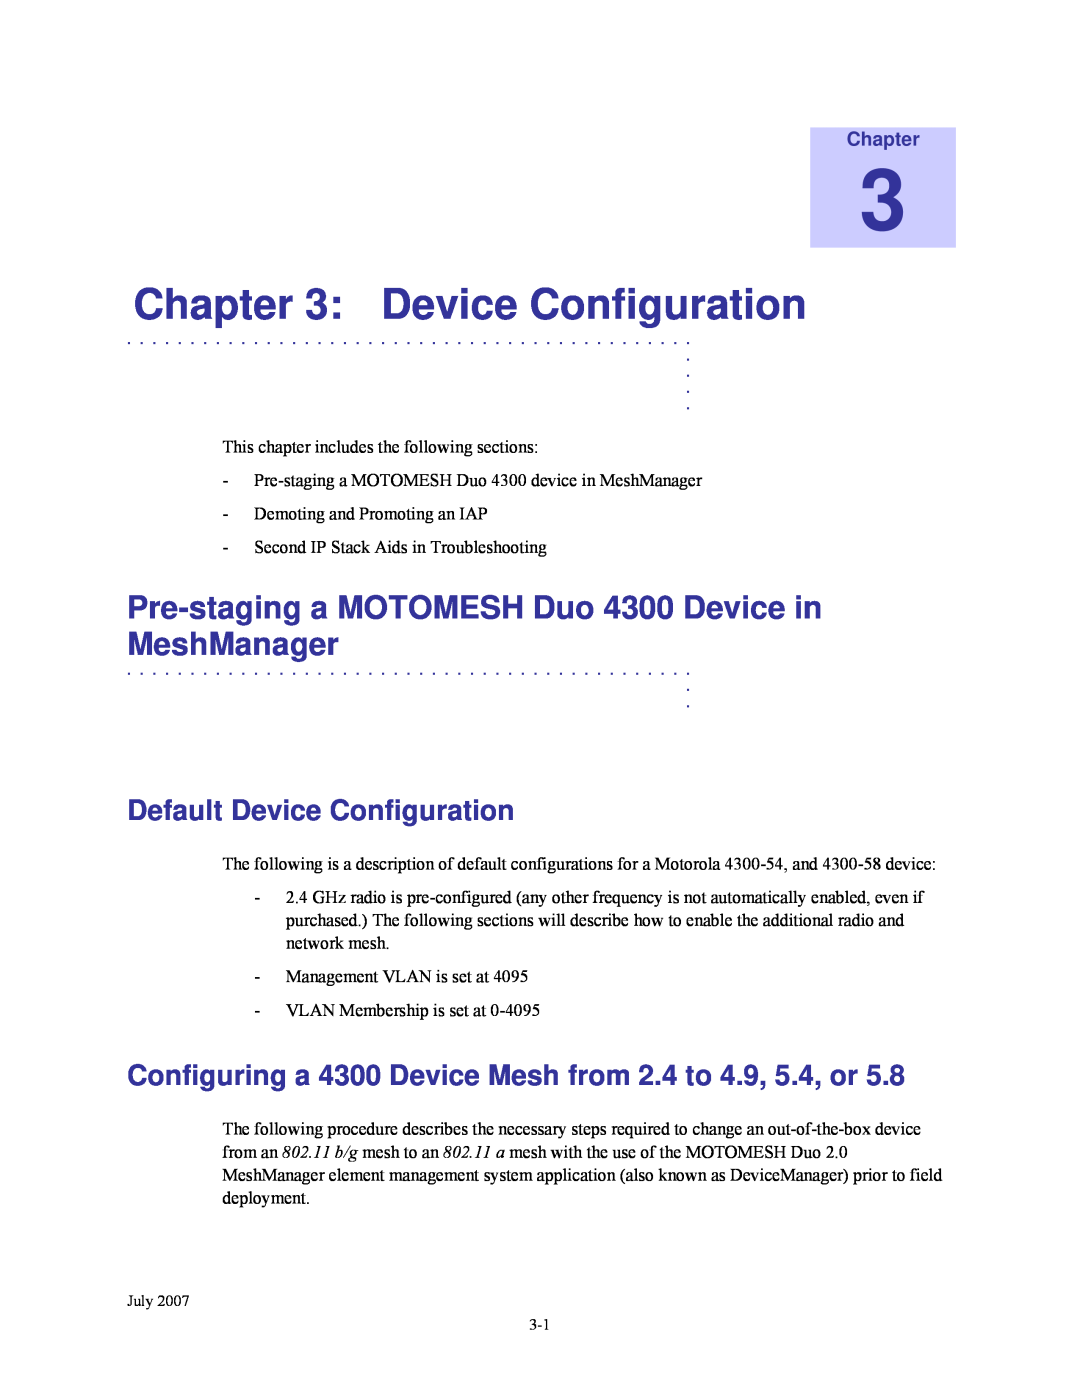 Nikon manual Pre-staging a MOTOMESH Duo 4300 Device in MeshManager, Default Device Configuration, Chapter 